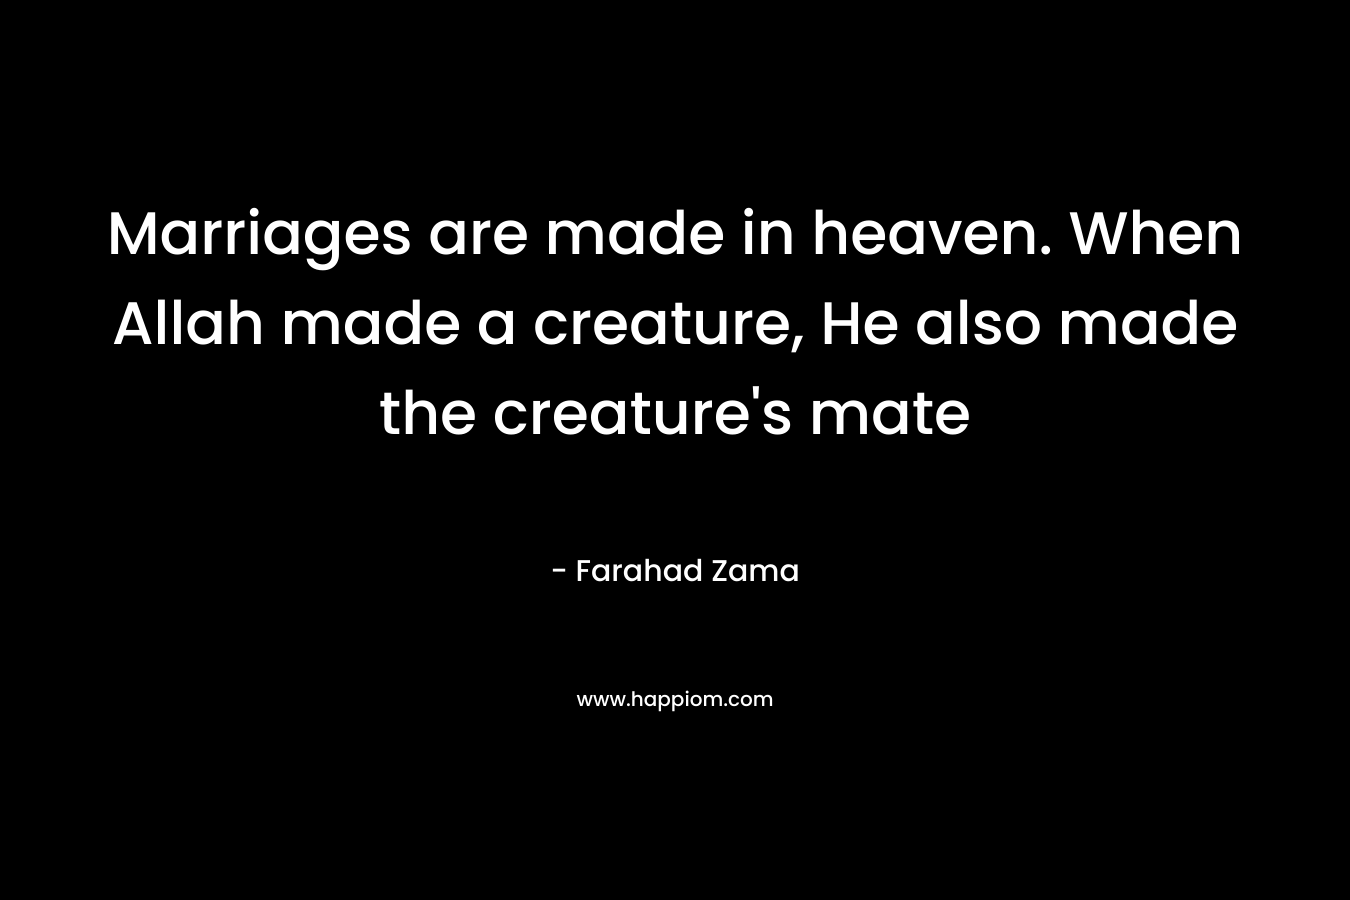 Marriages are made in heaven. When Allah made a creature, He also made the creature's mate